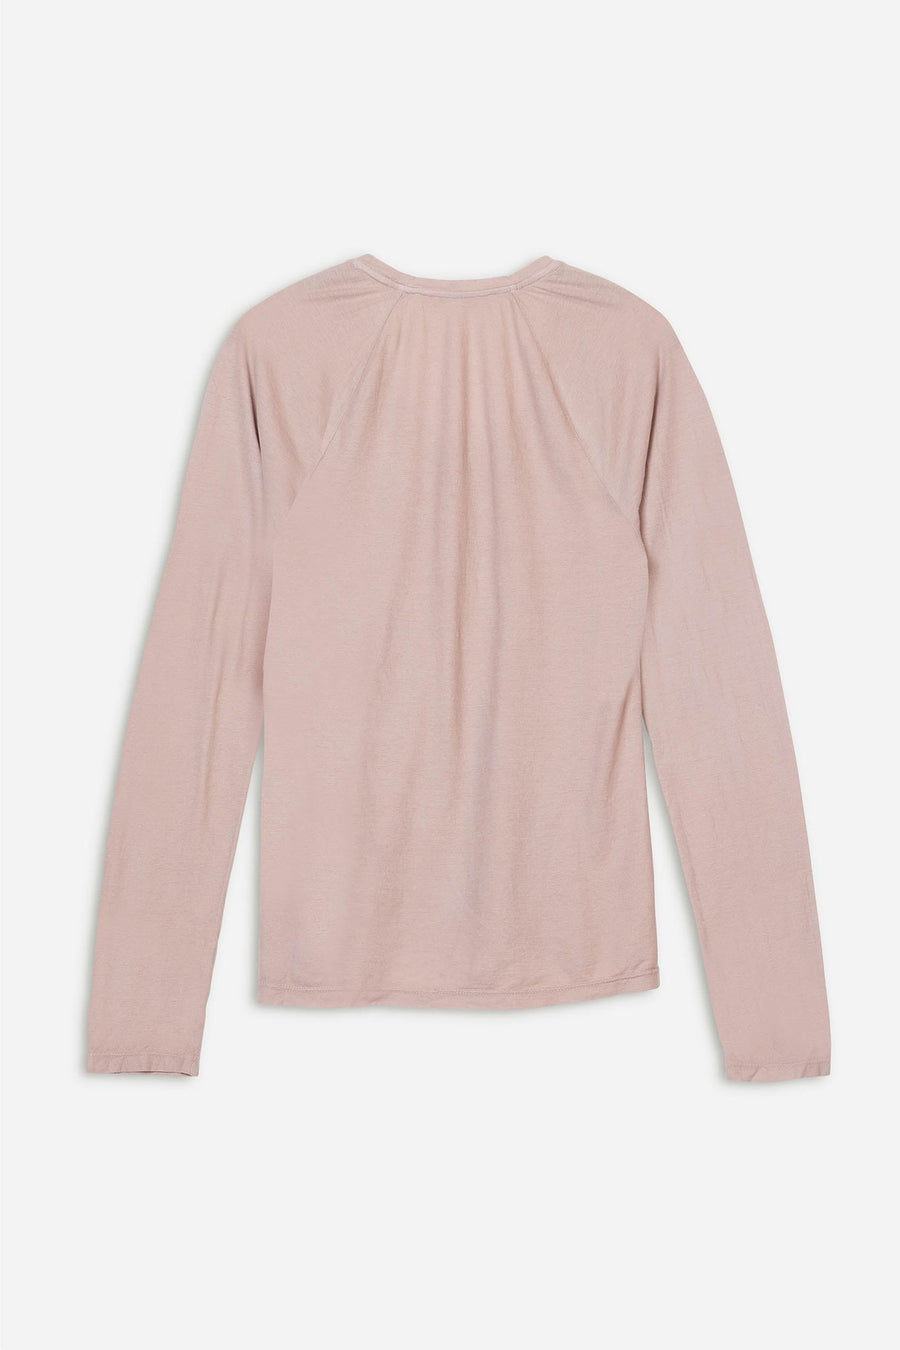 P.C.H. LONG SLEEVE SCOOP NECK TEE, ORCHID - Burning Torch Online Boutique